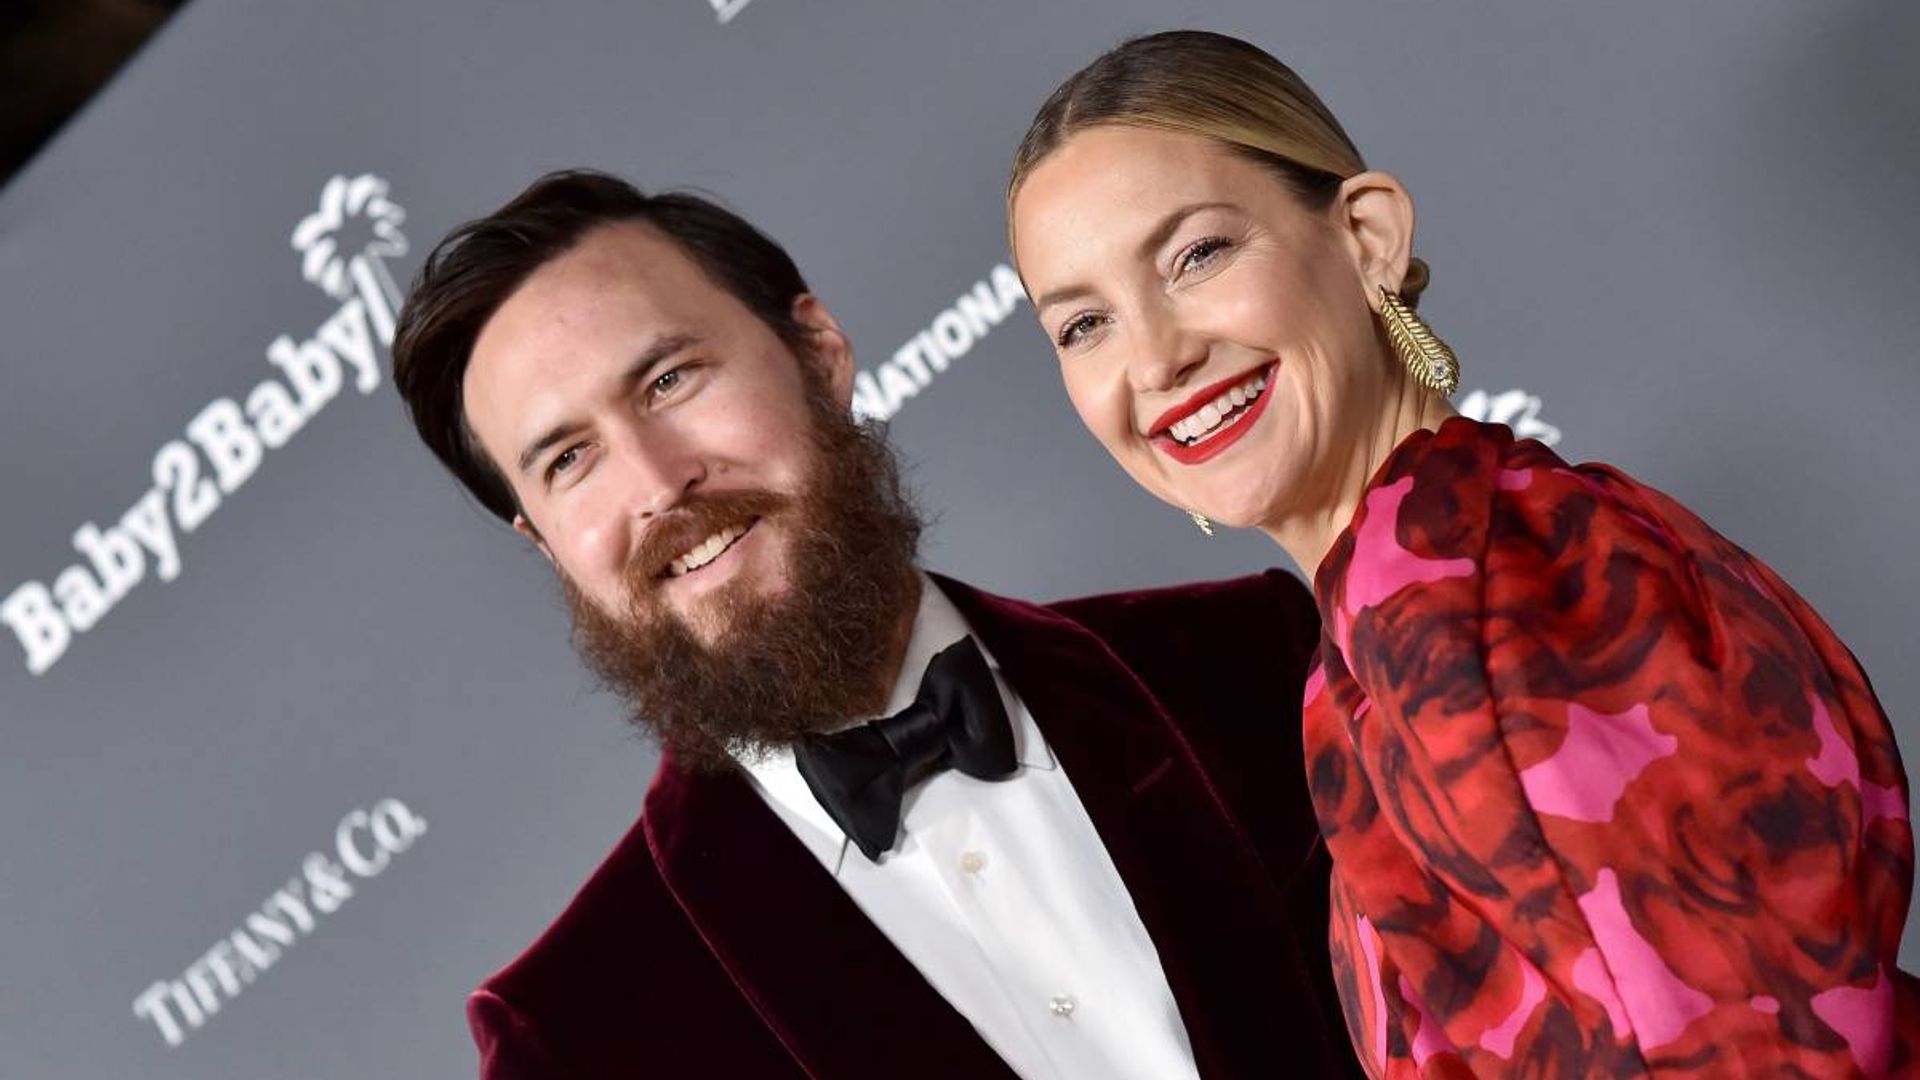 Kate Hudson is a proud aunt as she introduces newborn baby niece